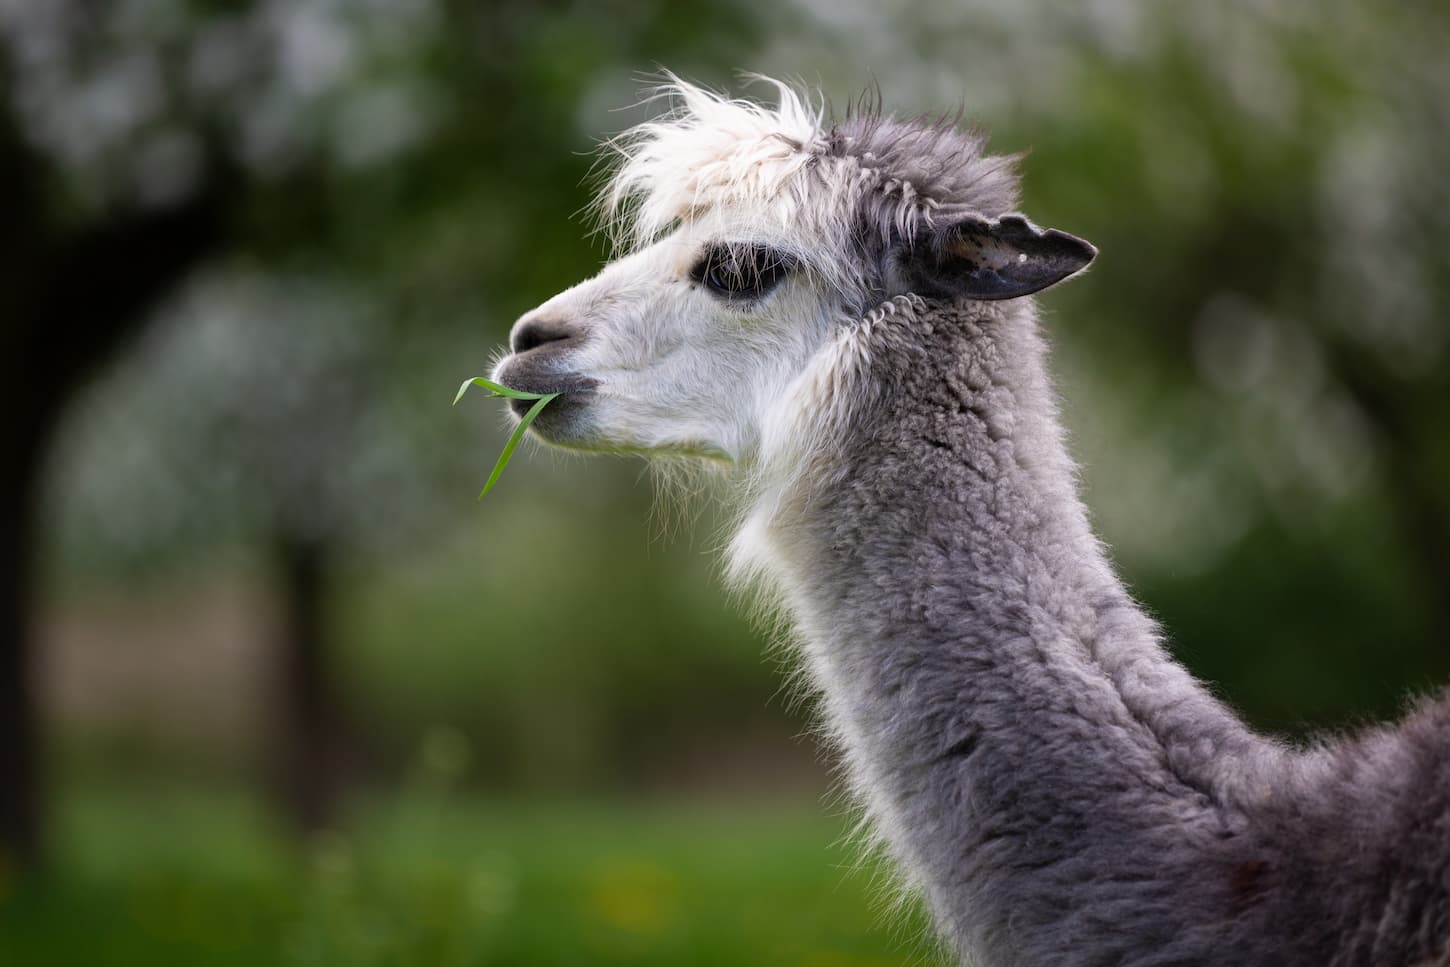 An image of an alpaca eating grass on the field.